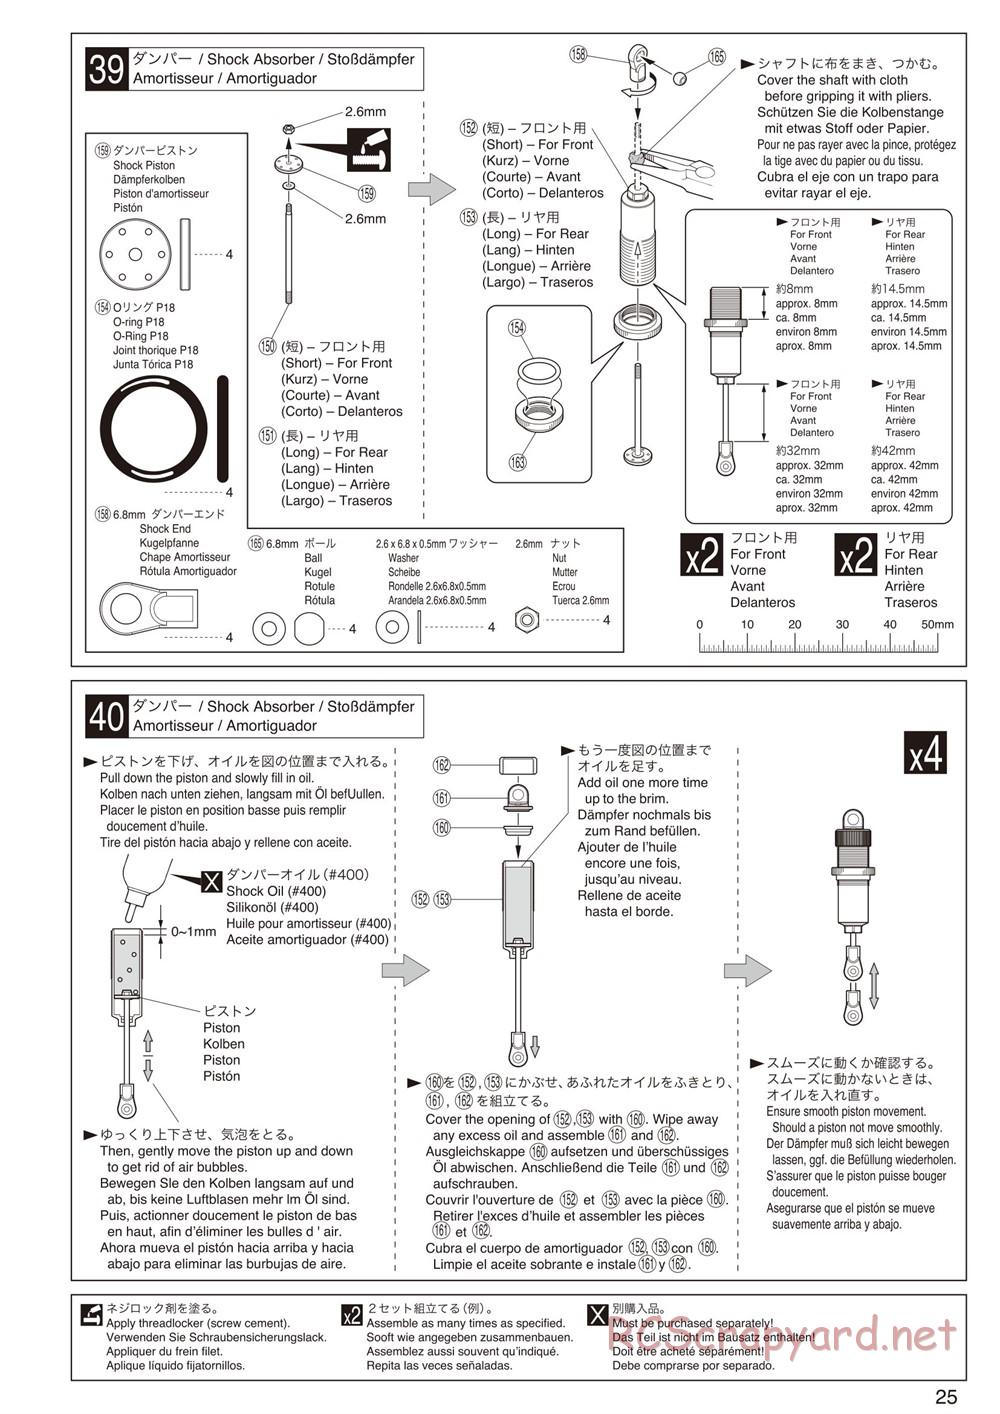 Kyosho - Inferno Neo 2.0 - Manual - Page 25